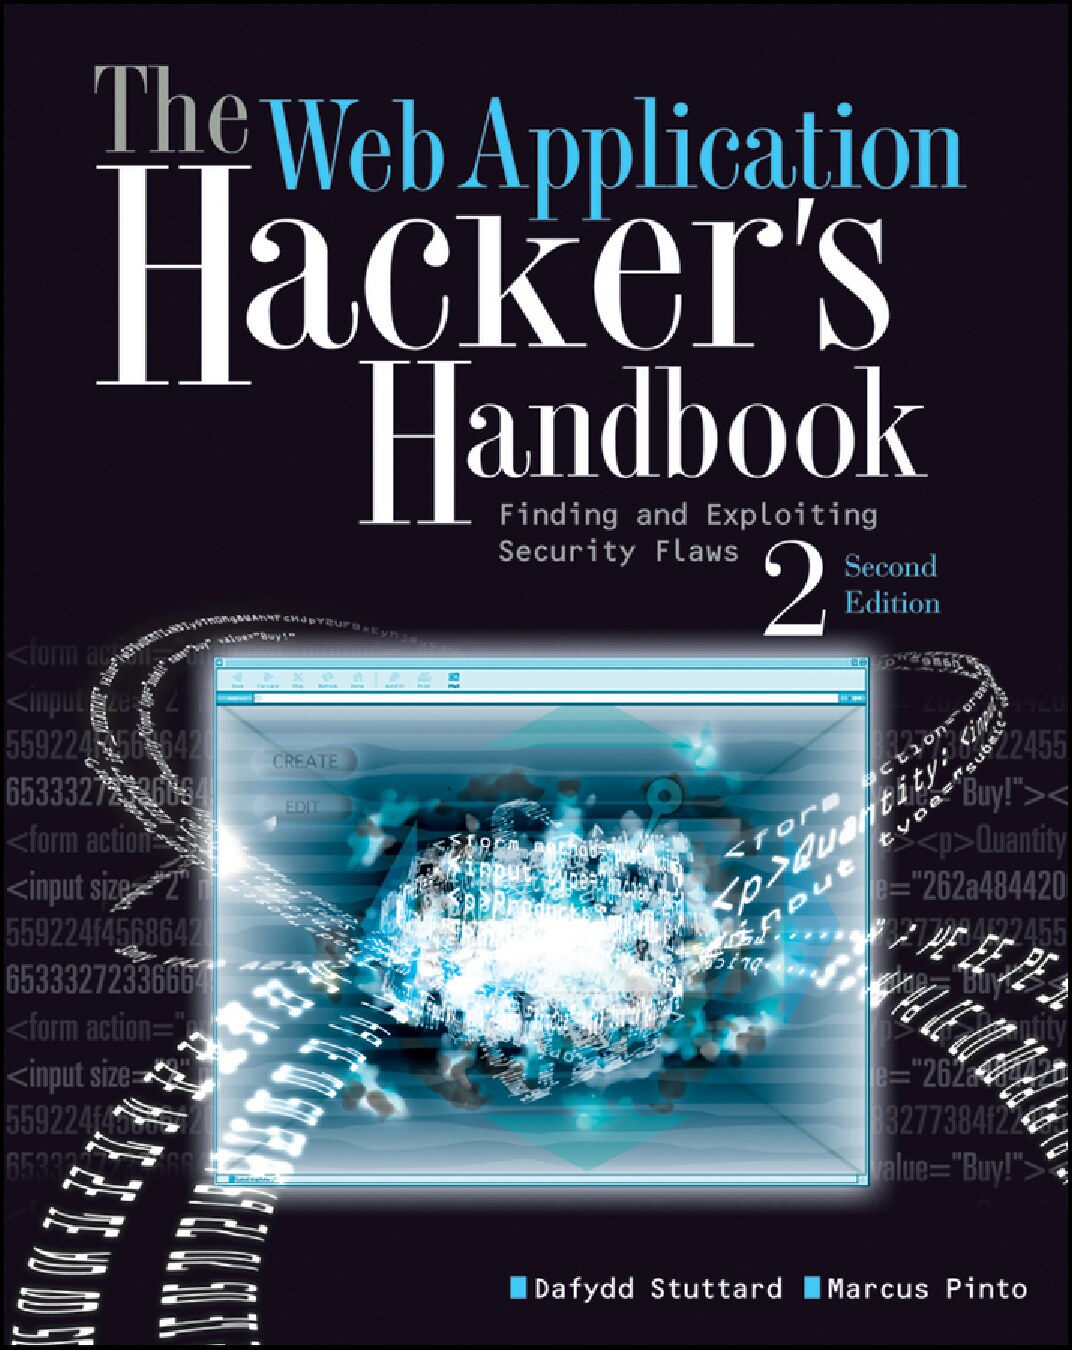 The Web Application Hacker’s Handbook: Finding and Exploiting Security Flaws (2nd Edition)